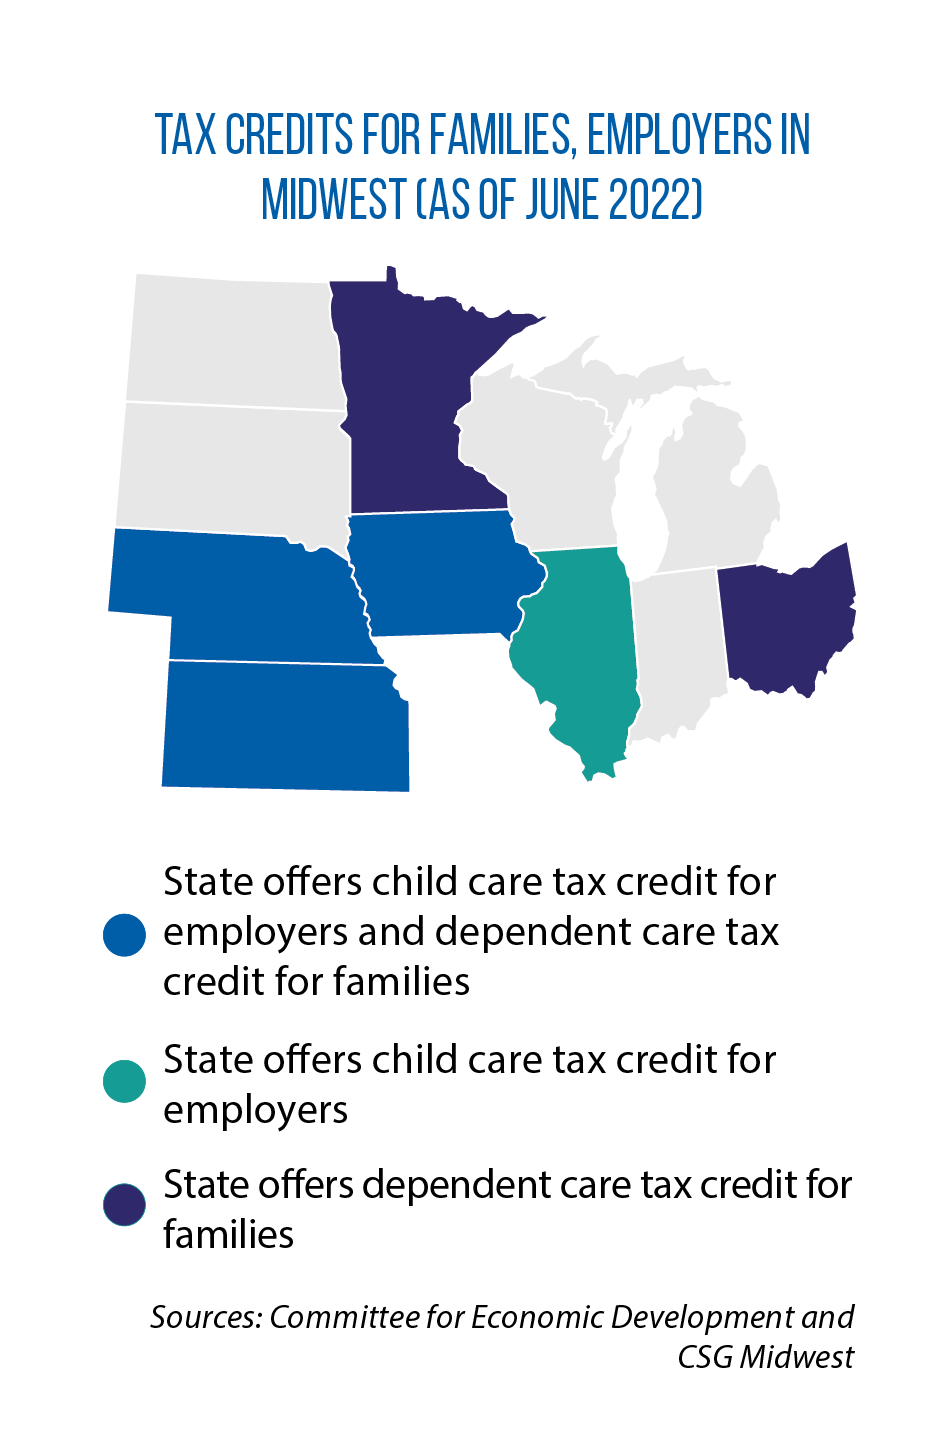 Map of child care tax credits available for families, employers in Midwestern states as of June 2022